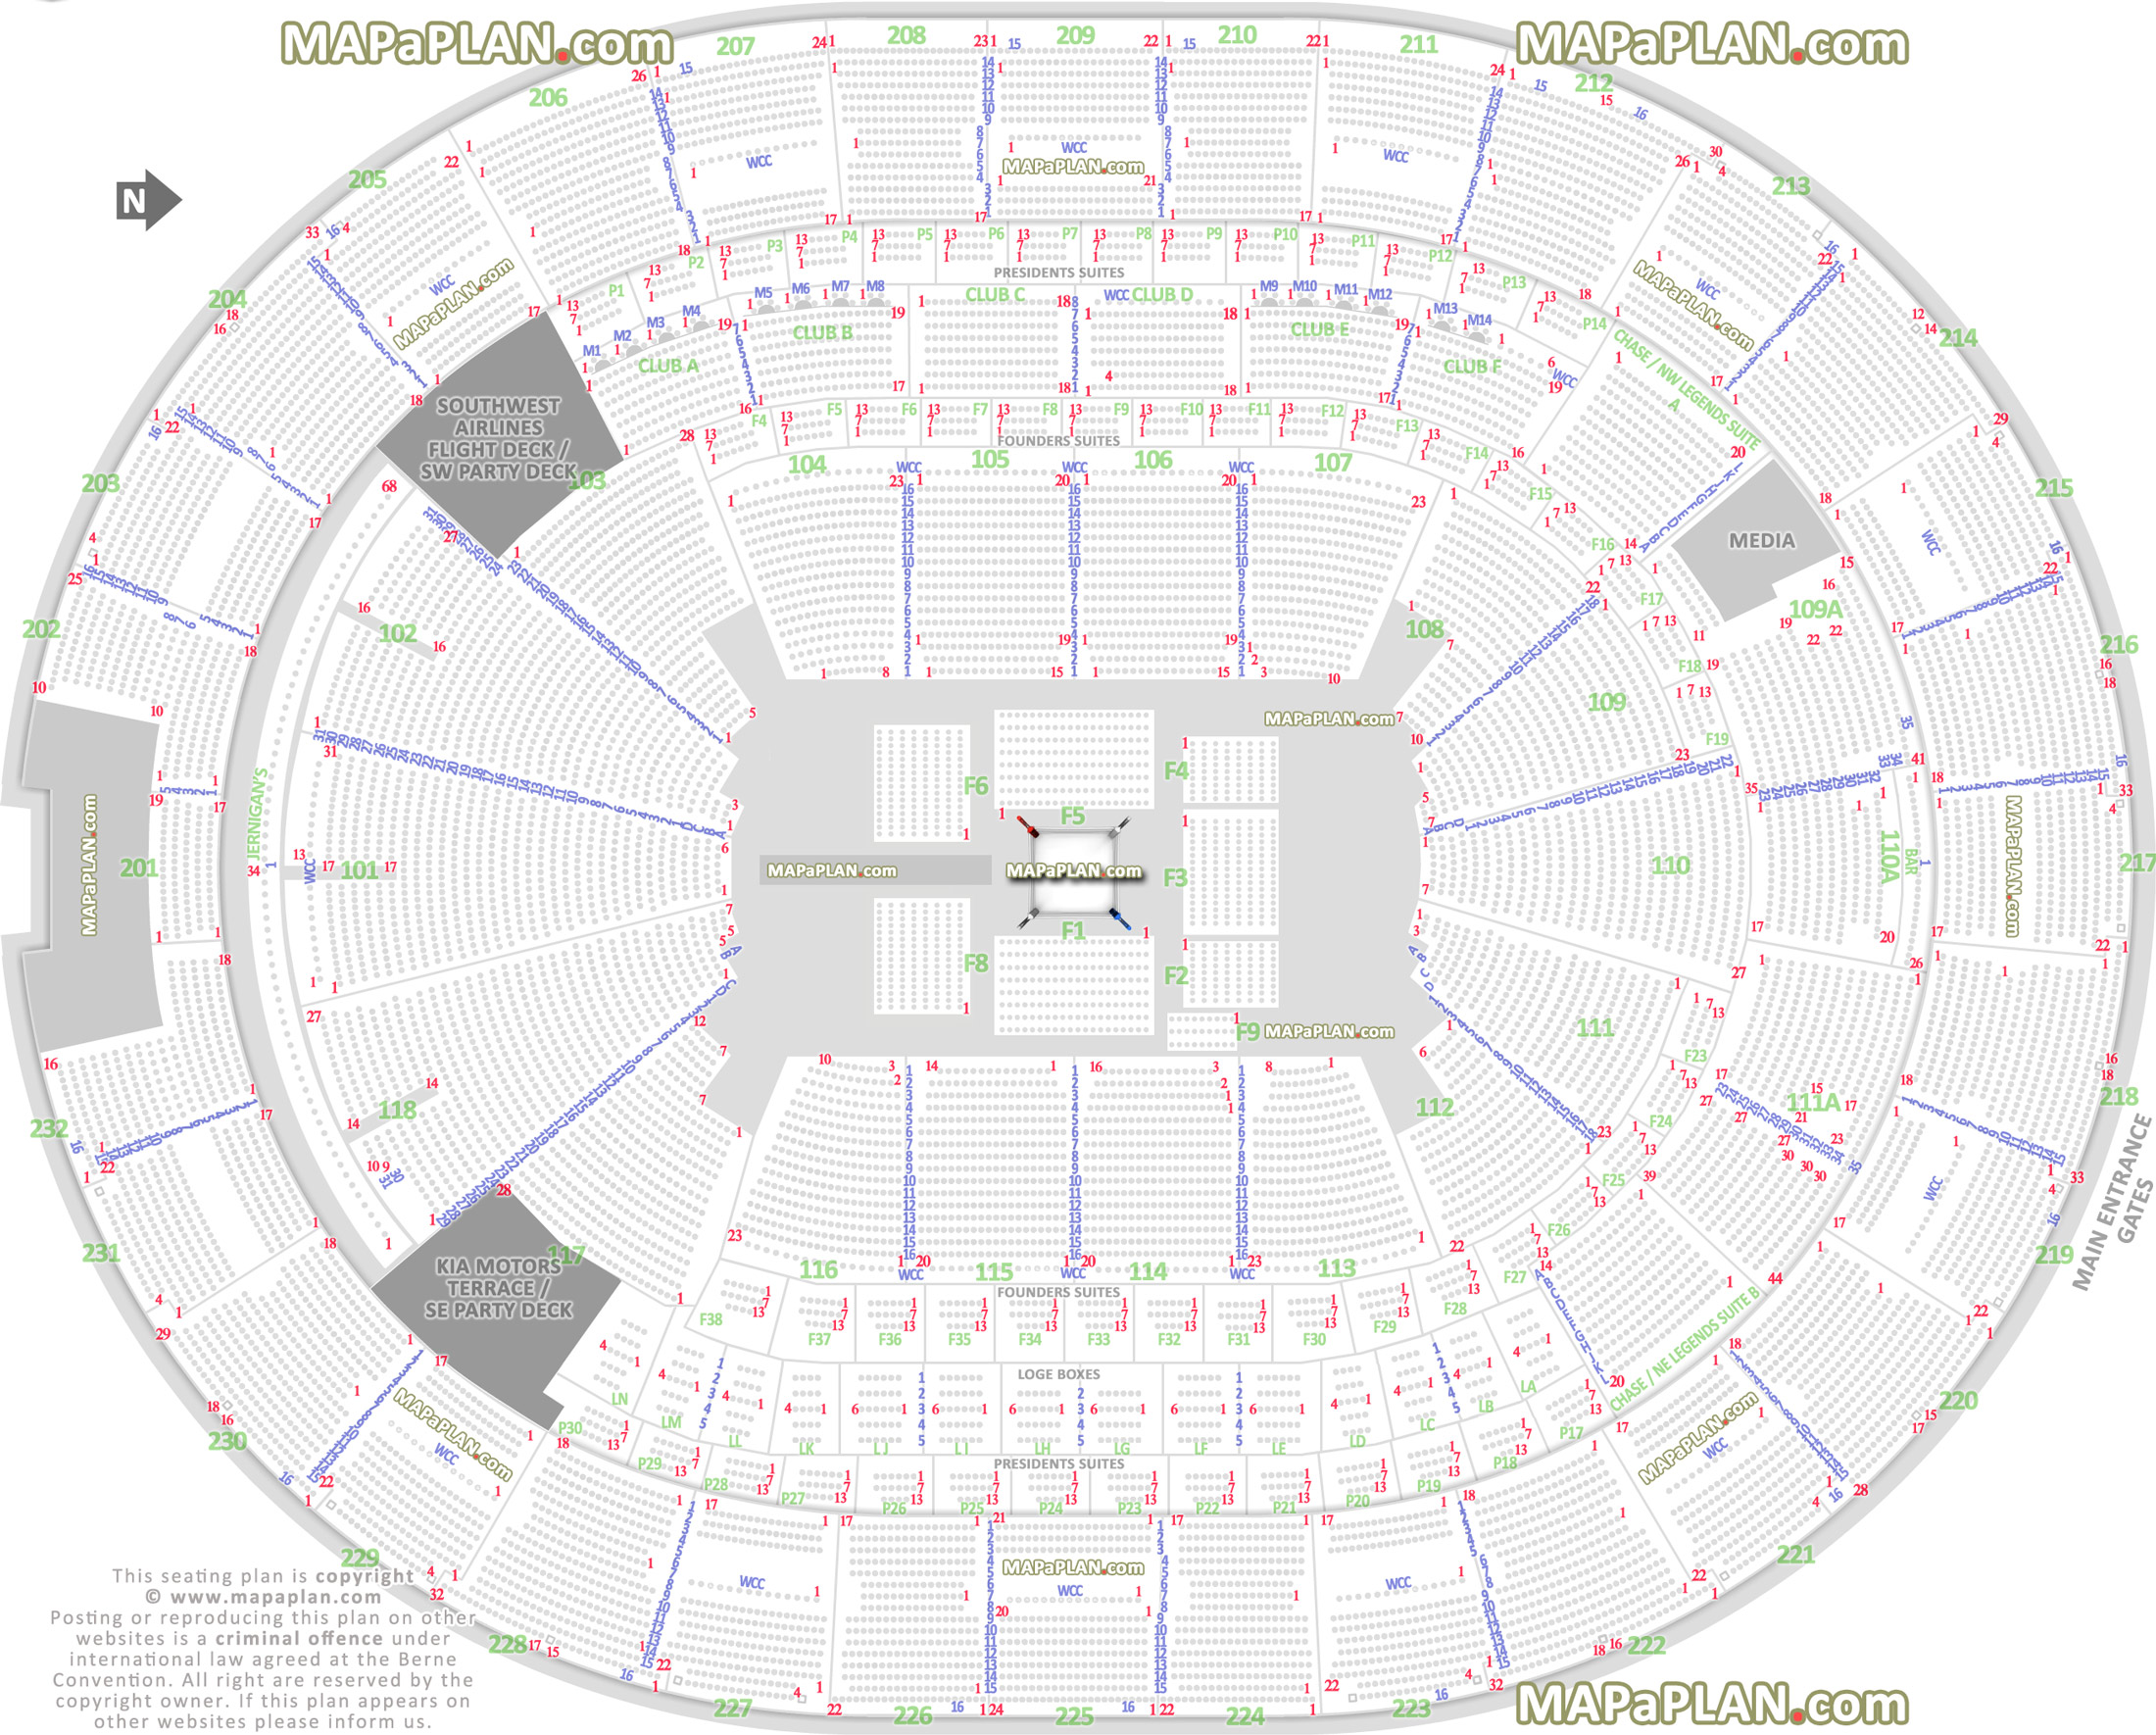 wwe raw smackdown live wrestling boxing match events 360 ring configuration row numbers good bad seats media press Orlando Kia Center seating chart